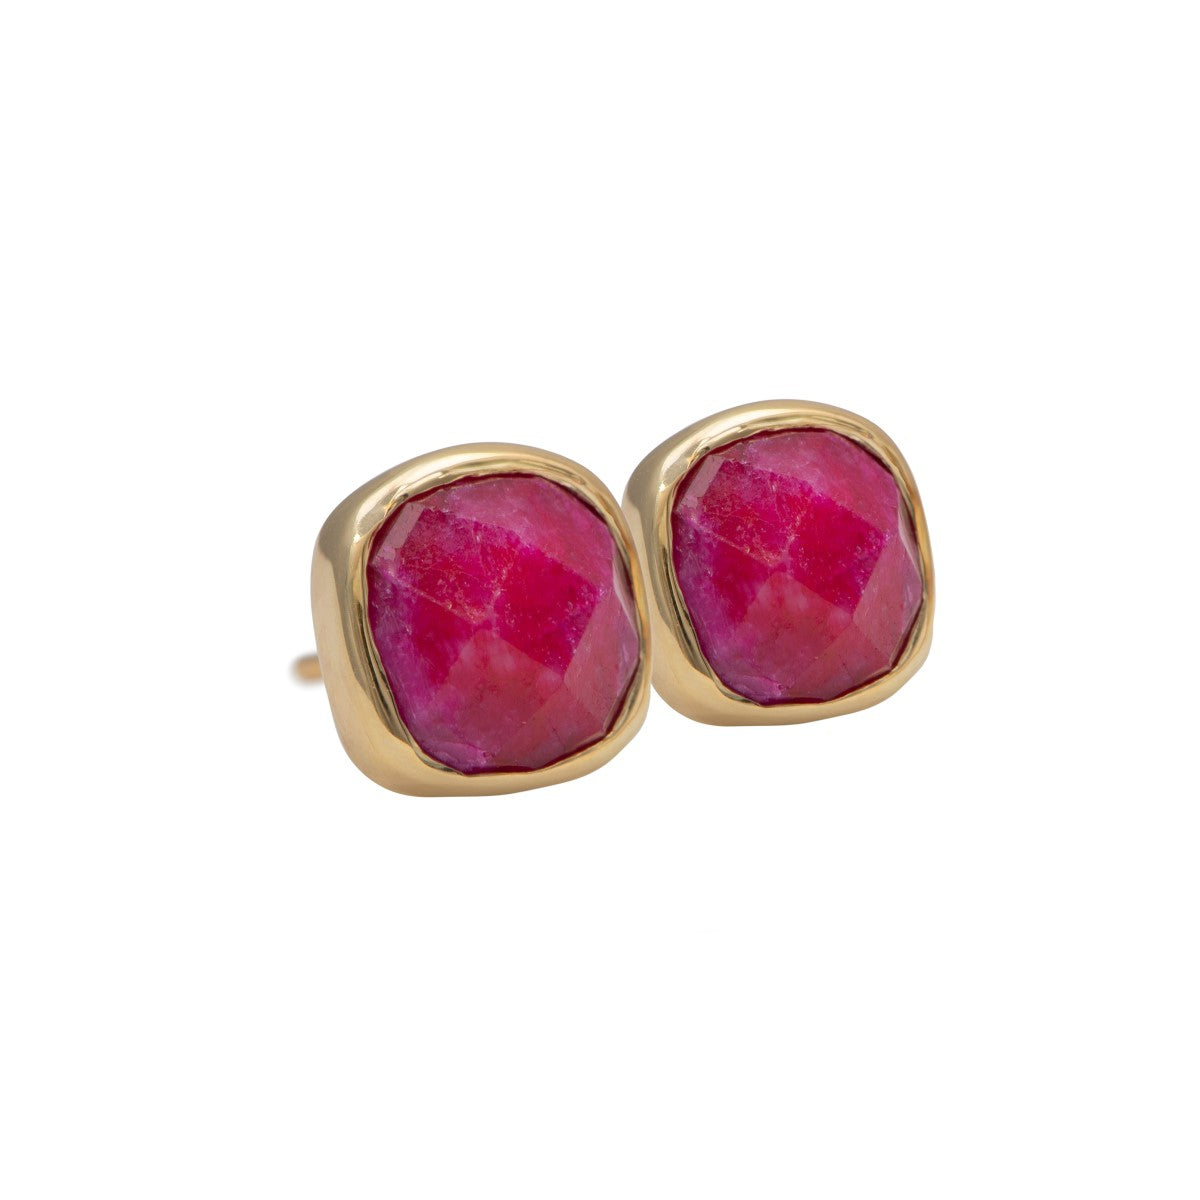 Faceted Square Ruby Quartz Gemstone Stud Earrings in Gold Plated Sterling Silver